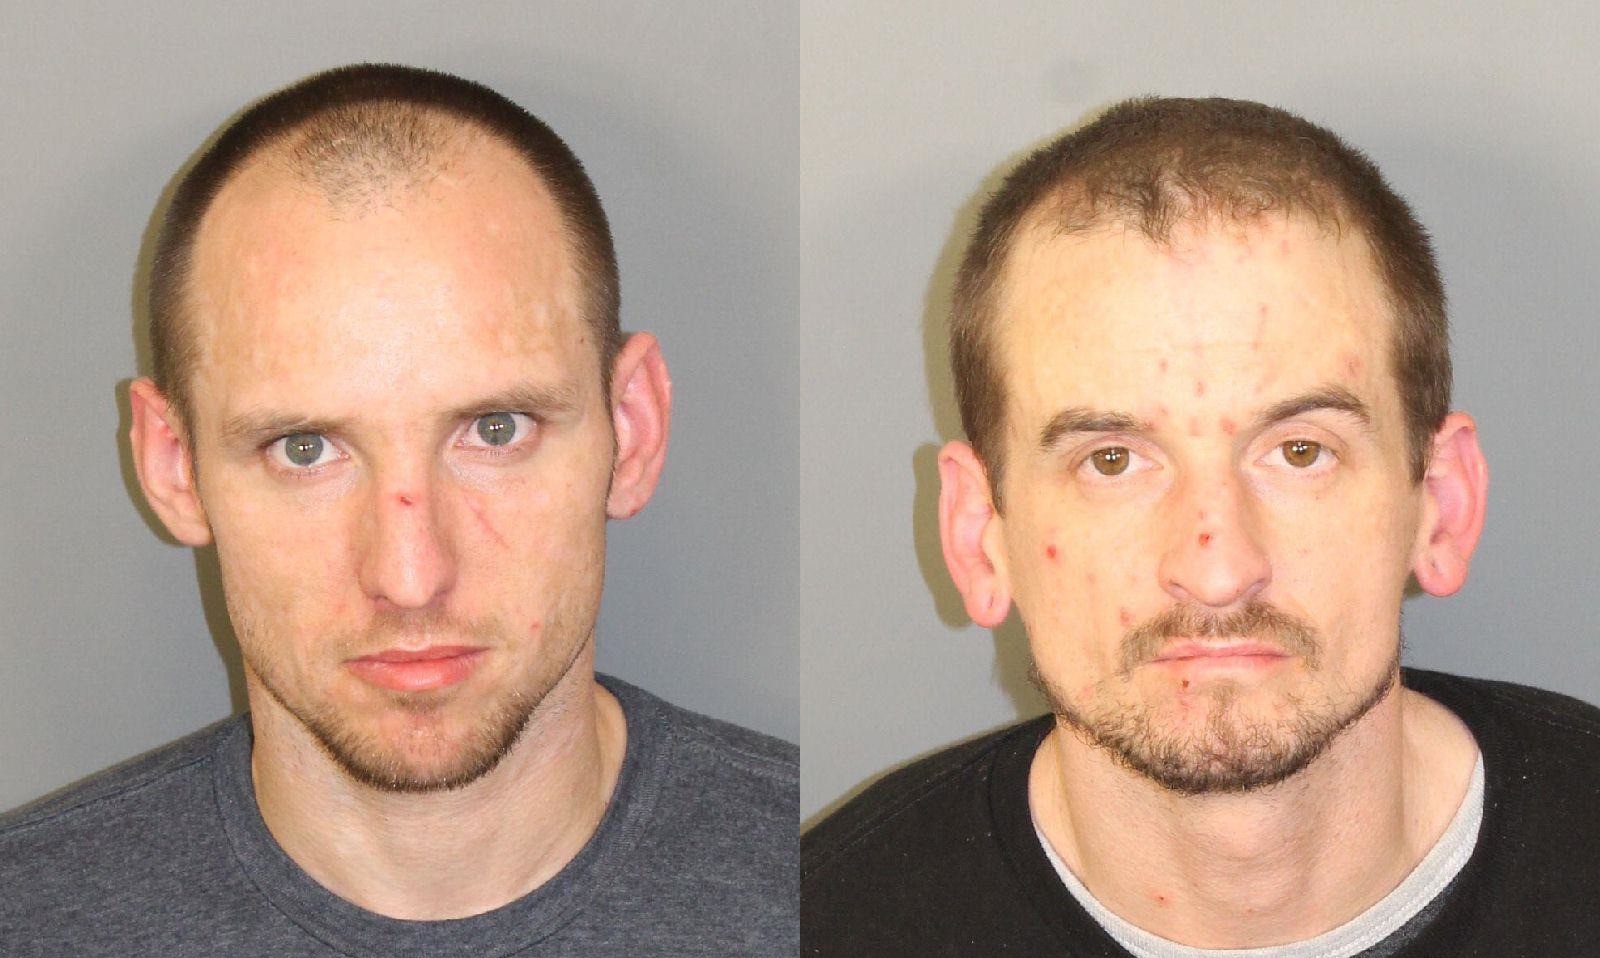 Report of mail theft in Jefferson County leads to drug arrests